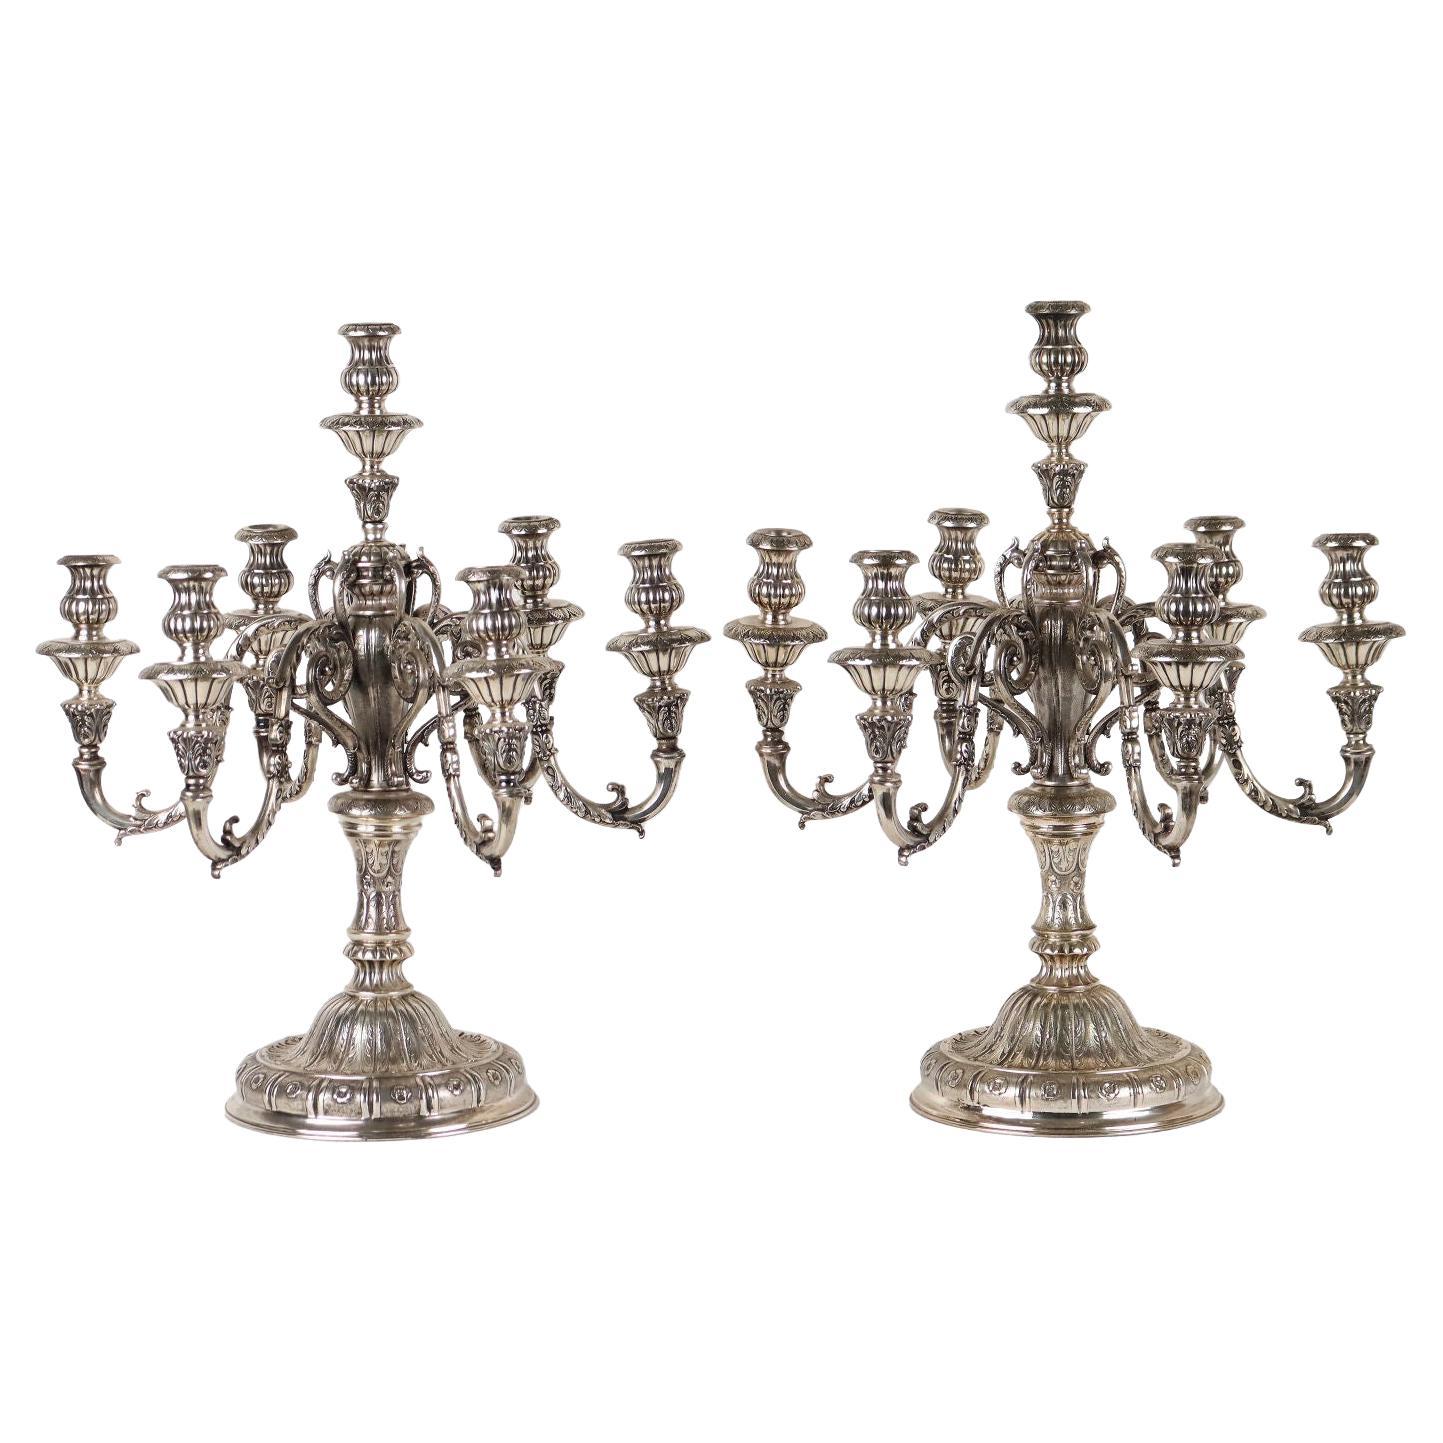 Pair of Seven-Armed Silver Candelabra